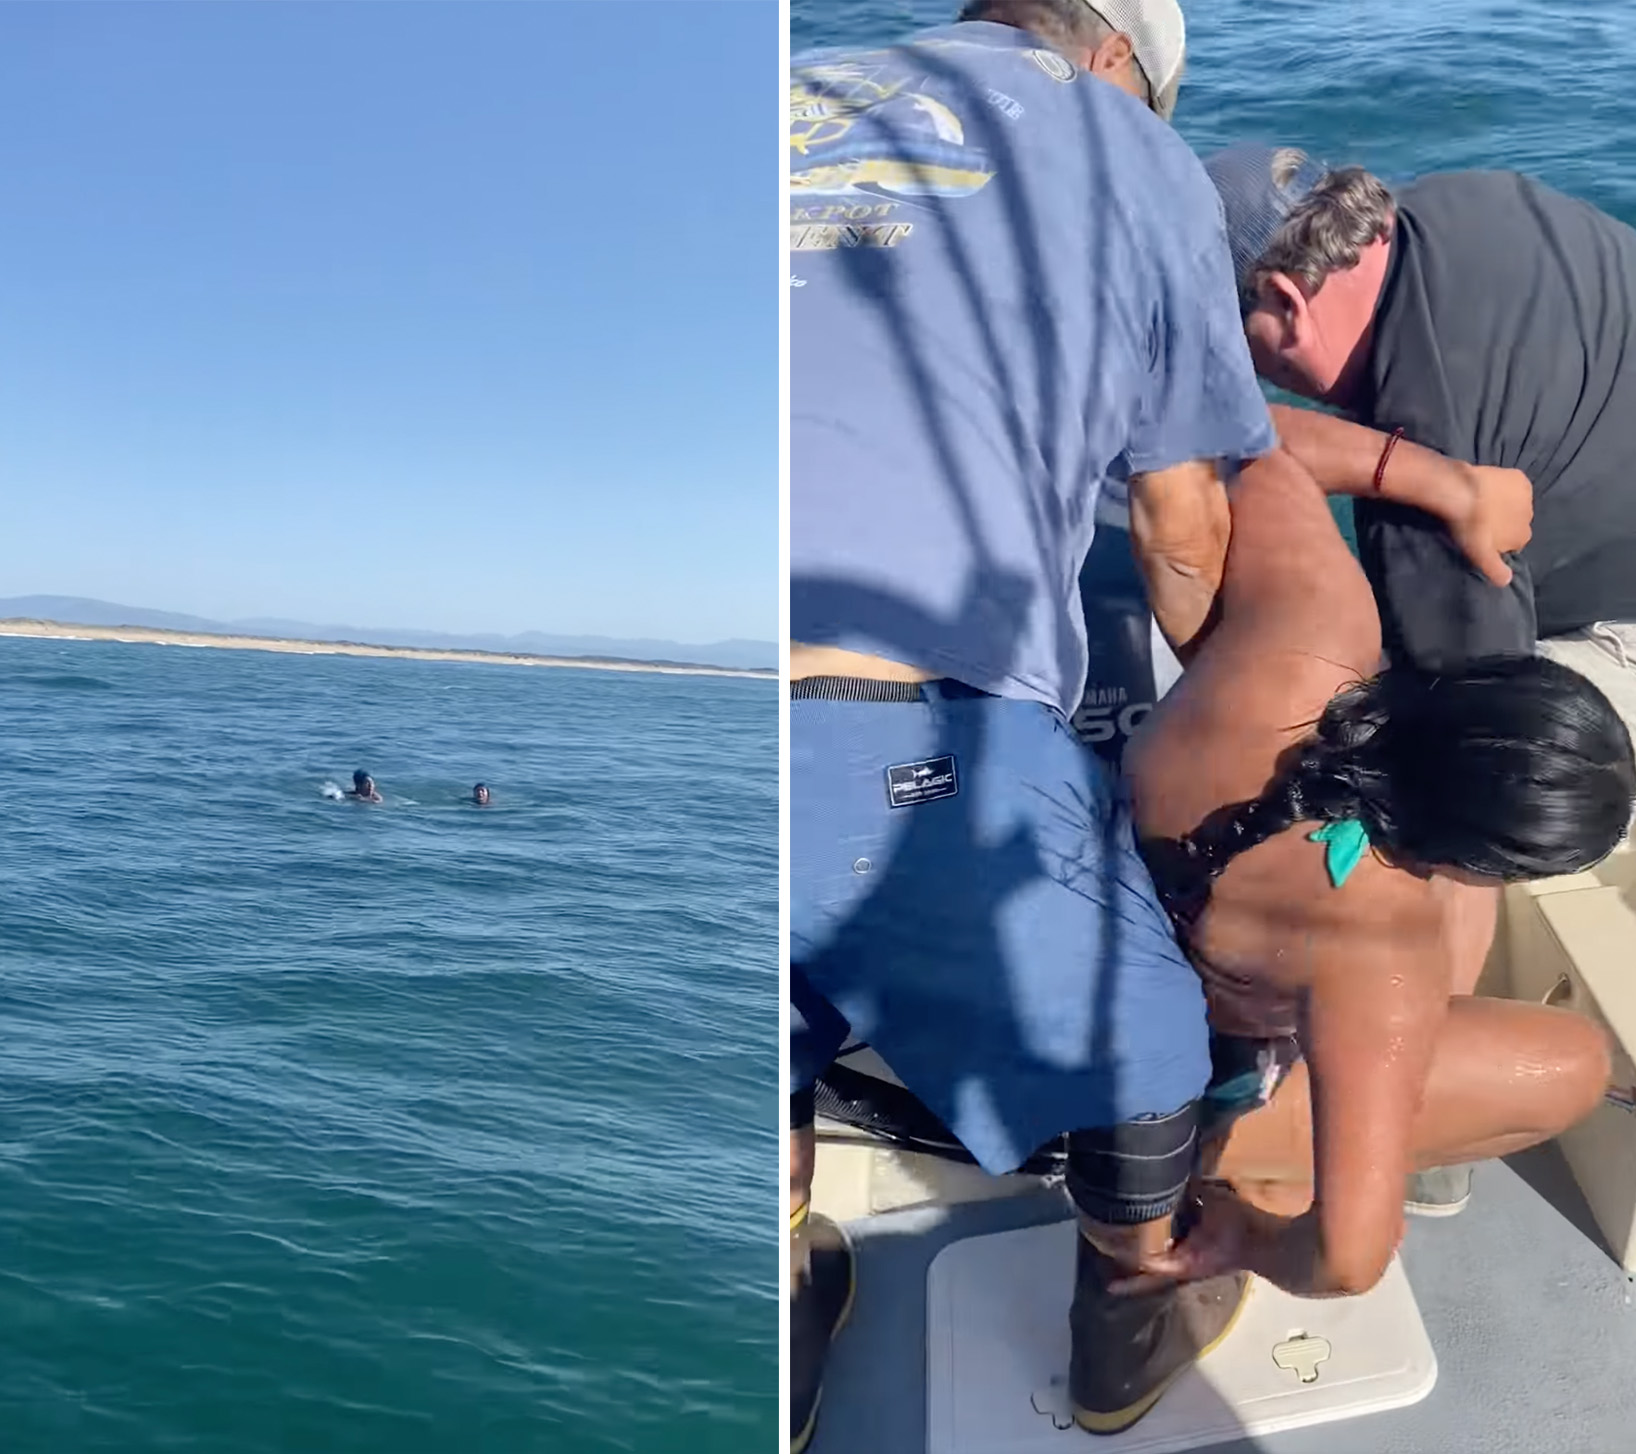 Watch: California Fishermen Save Two Teenagers from Drowning in Monterey Bay